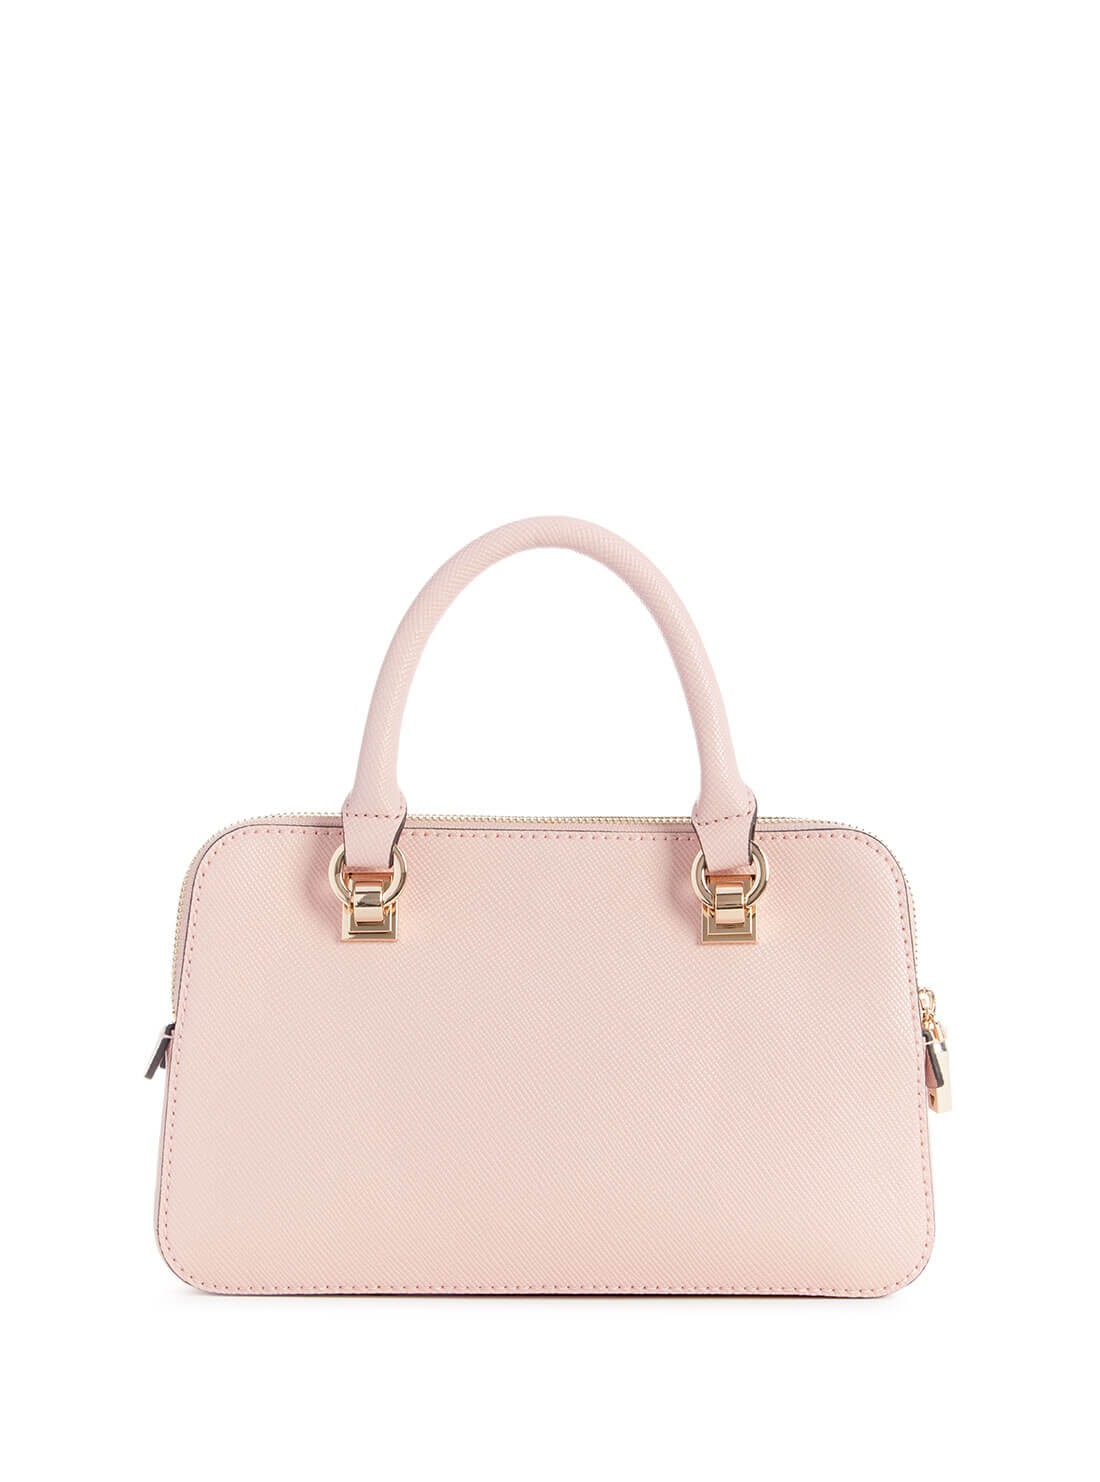 Women's Blush Pink Brynlee Small Status Satchel Bag back view